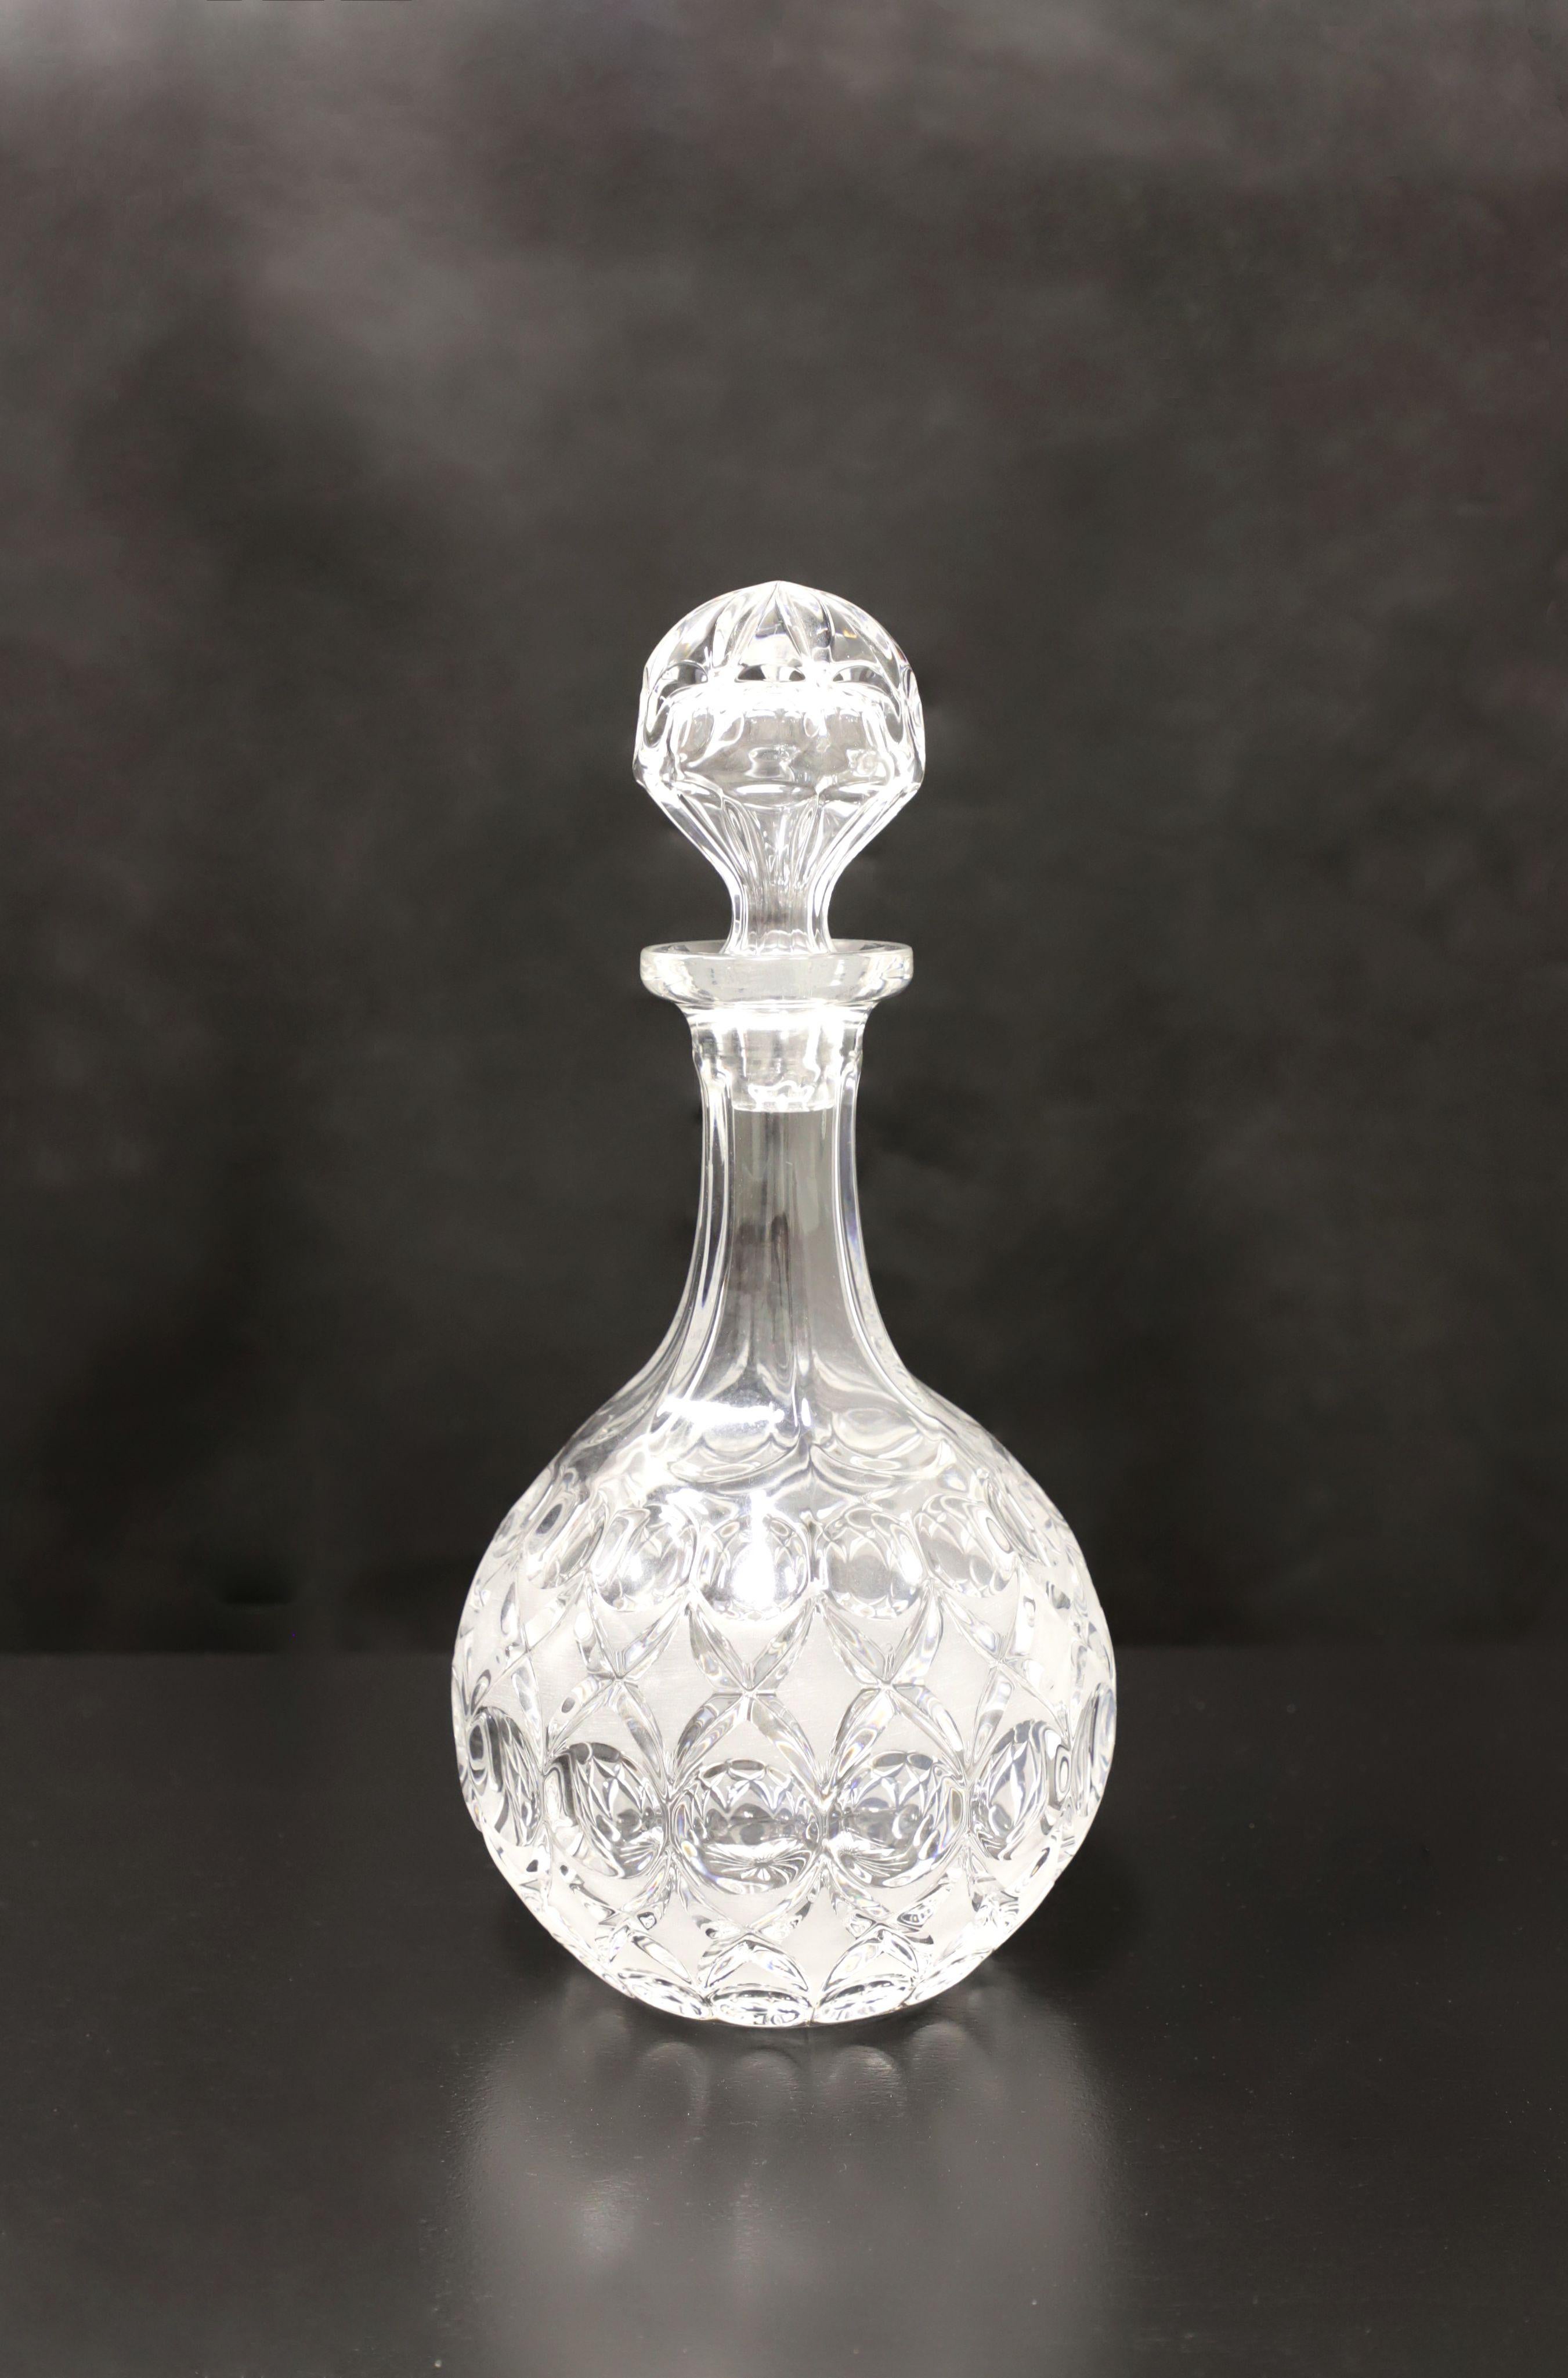 Mid 20th Century Crystal Decanter - A 4